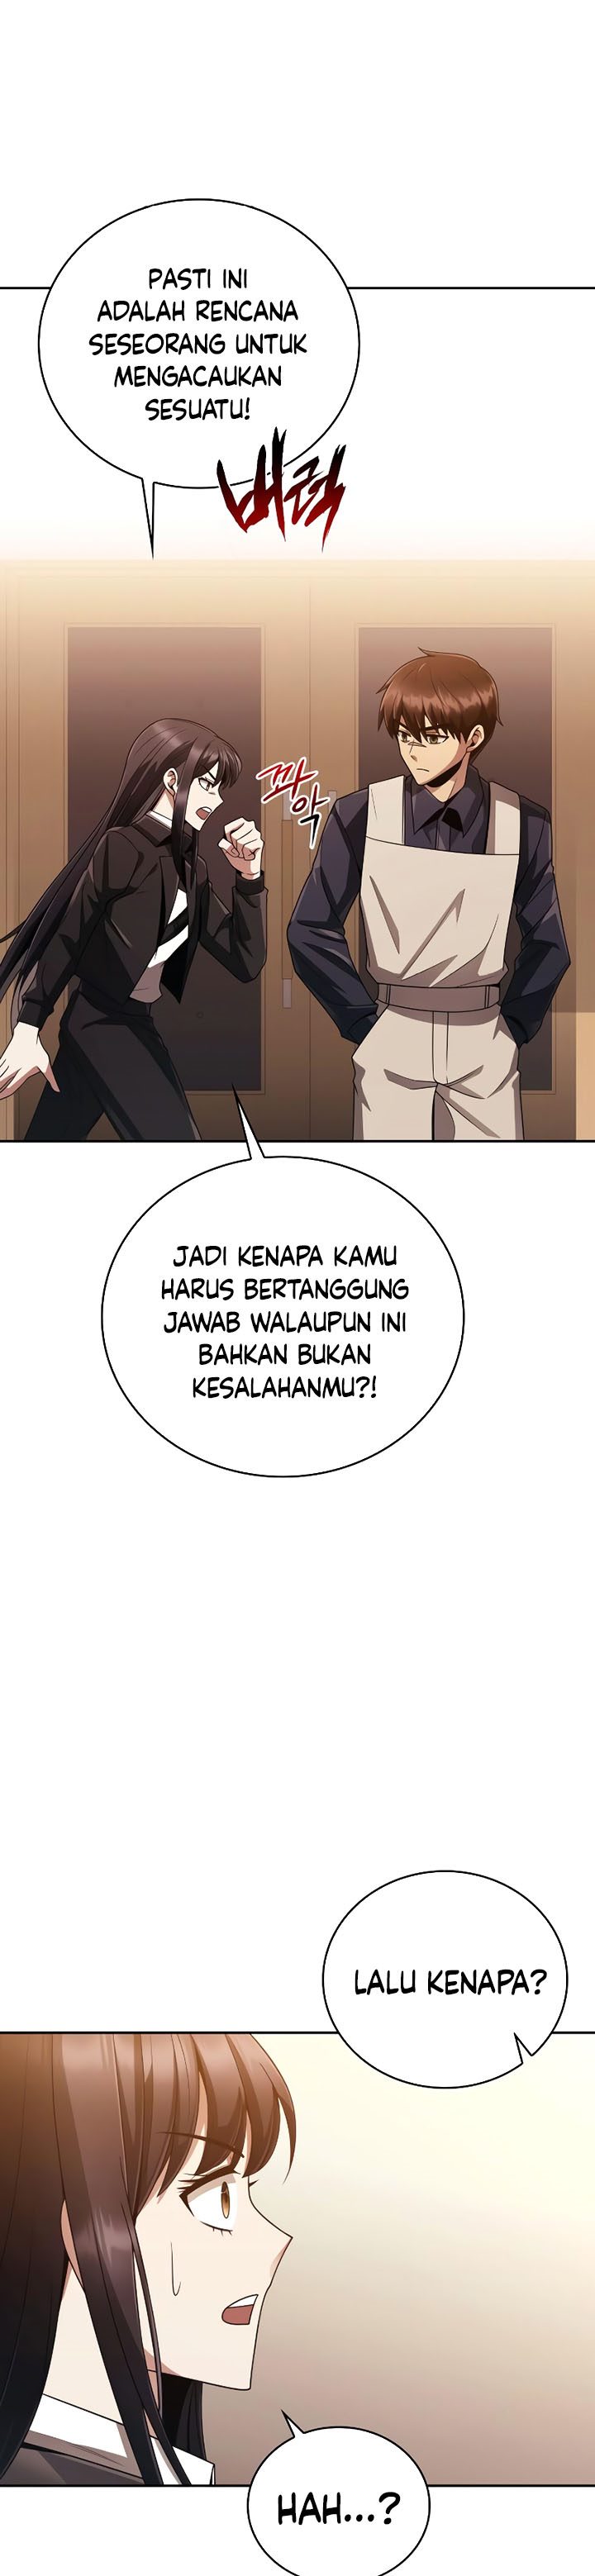 Dilarang COPAS - situs resmi www.mangacanblog.com - Komik clever cleaning life of the returned genius hunter 019 - chapter 19 20 Indonesia clever cleaning life of the returned genius hunter 019 - chapter 19 Terbaru 40|Baca Manga Komik Indonesia|Mangacan